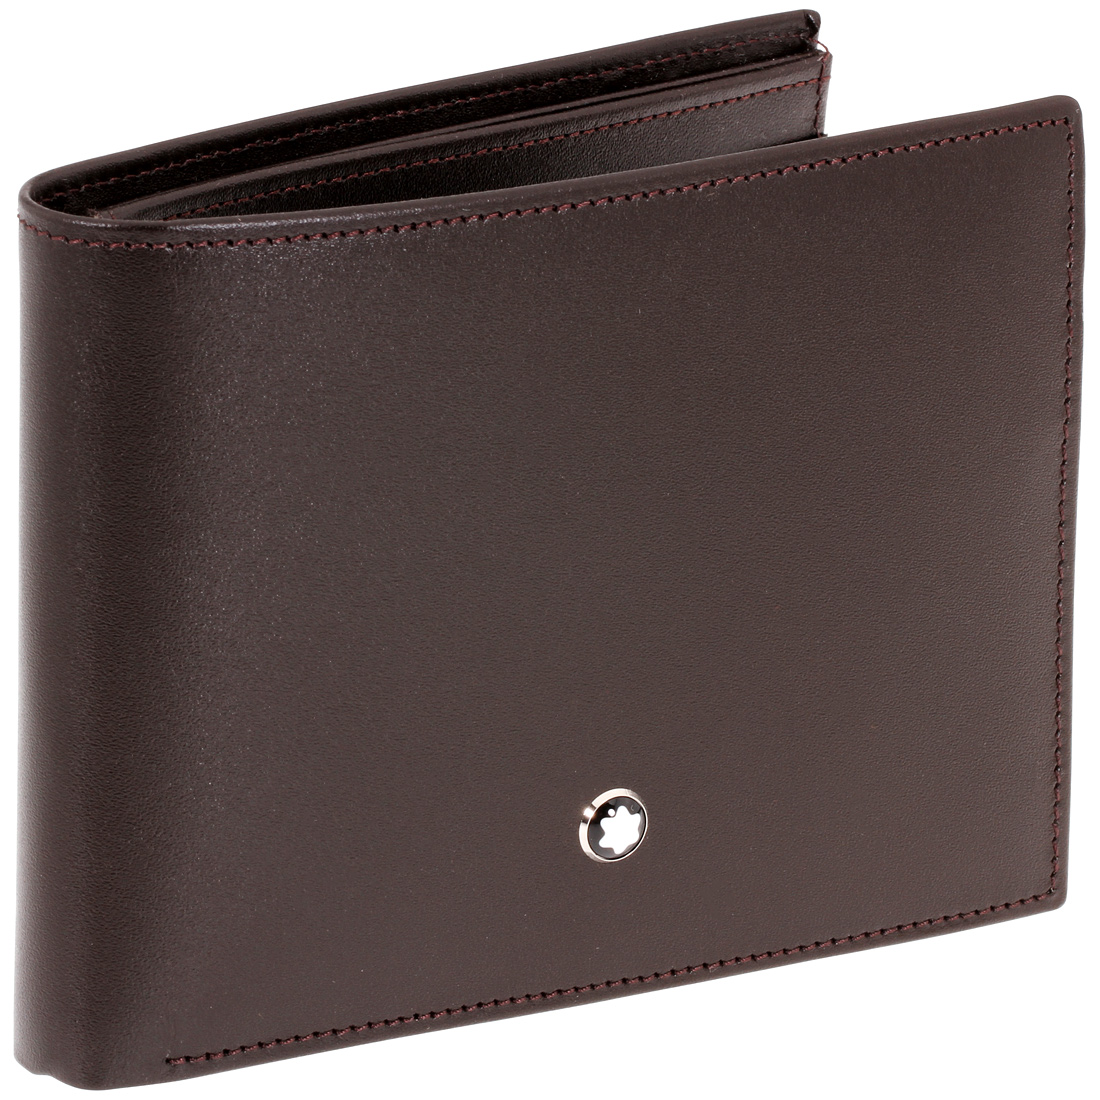 Montblanc Meisterstuck Men's Small Brown Leather Bifold Wallets 114541 ...